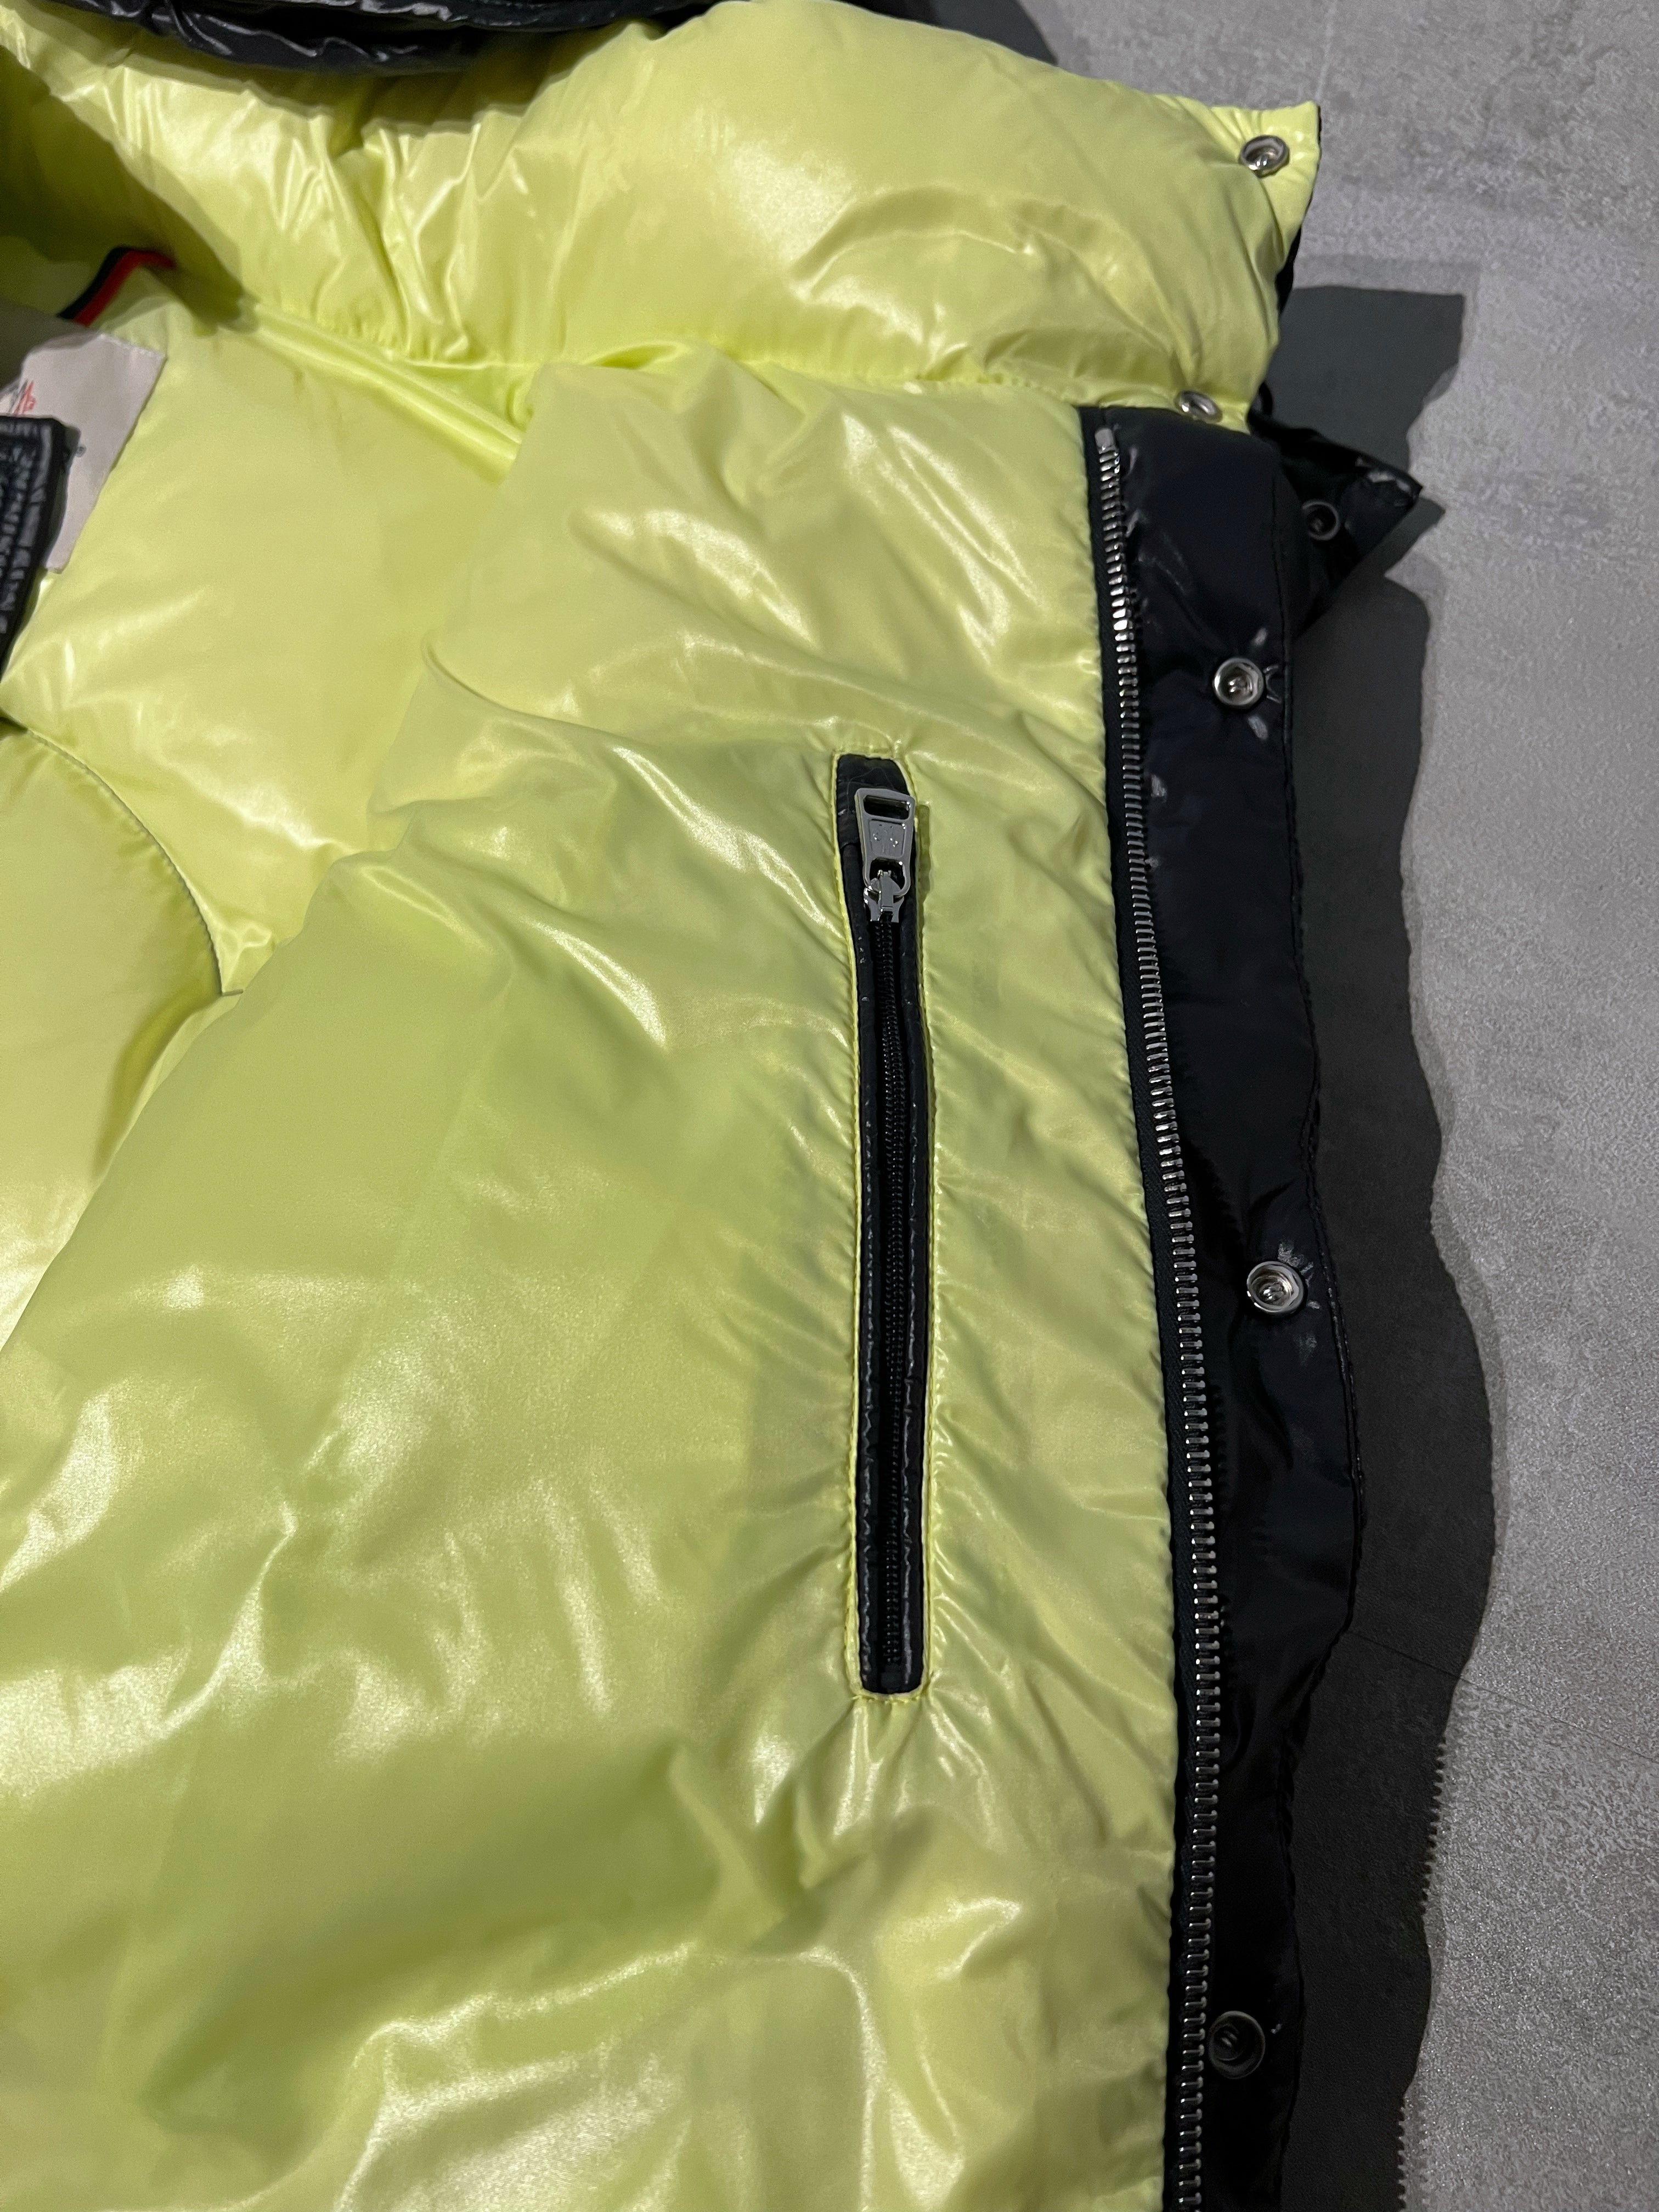 Moncler Coutard Jacket